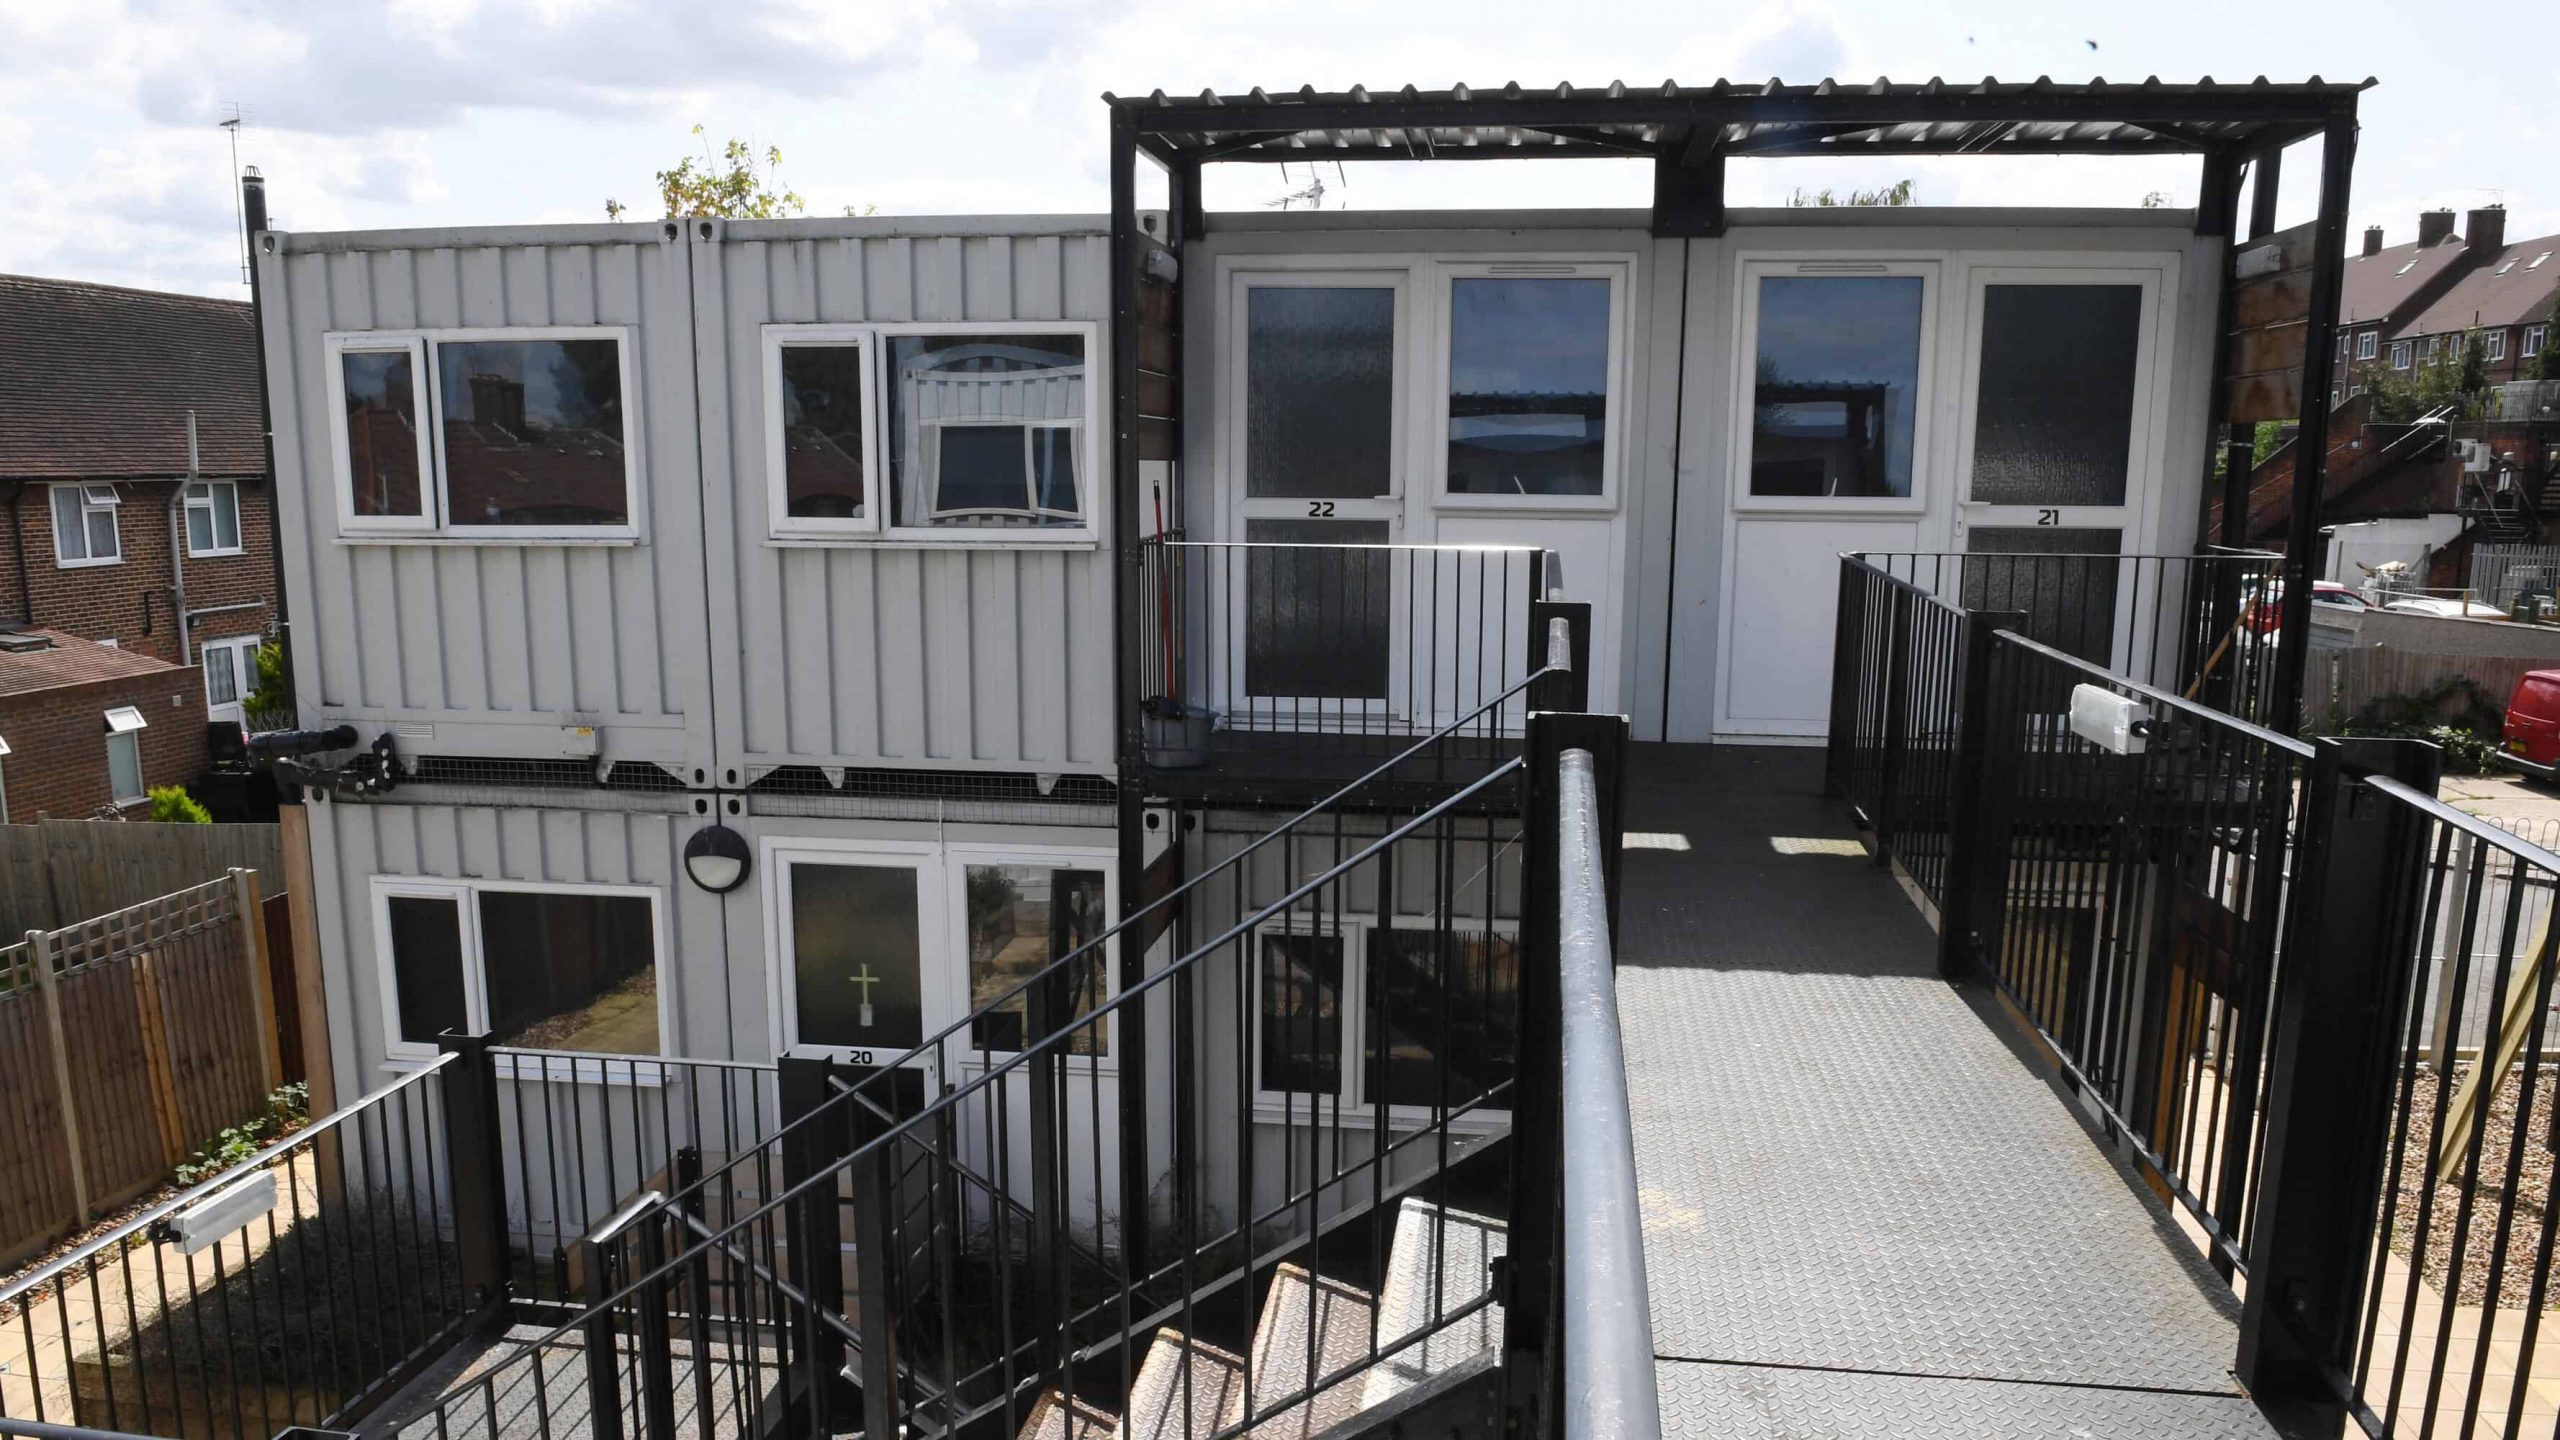 Families with children are now being housed in shipping containers due to lack of council accommodation